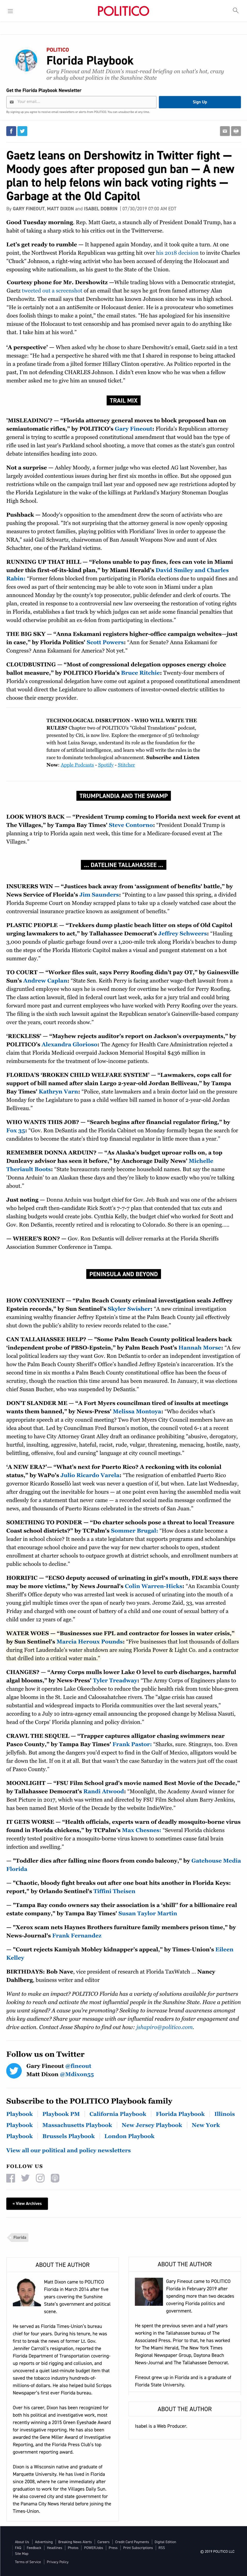 POLITICO Florida Playbook Gary Fineout and Matt Dixon's Must-Read Briefing on What's Hot, Crazy Or Shady About Politics in the Sunshine State